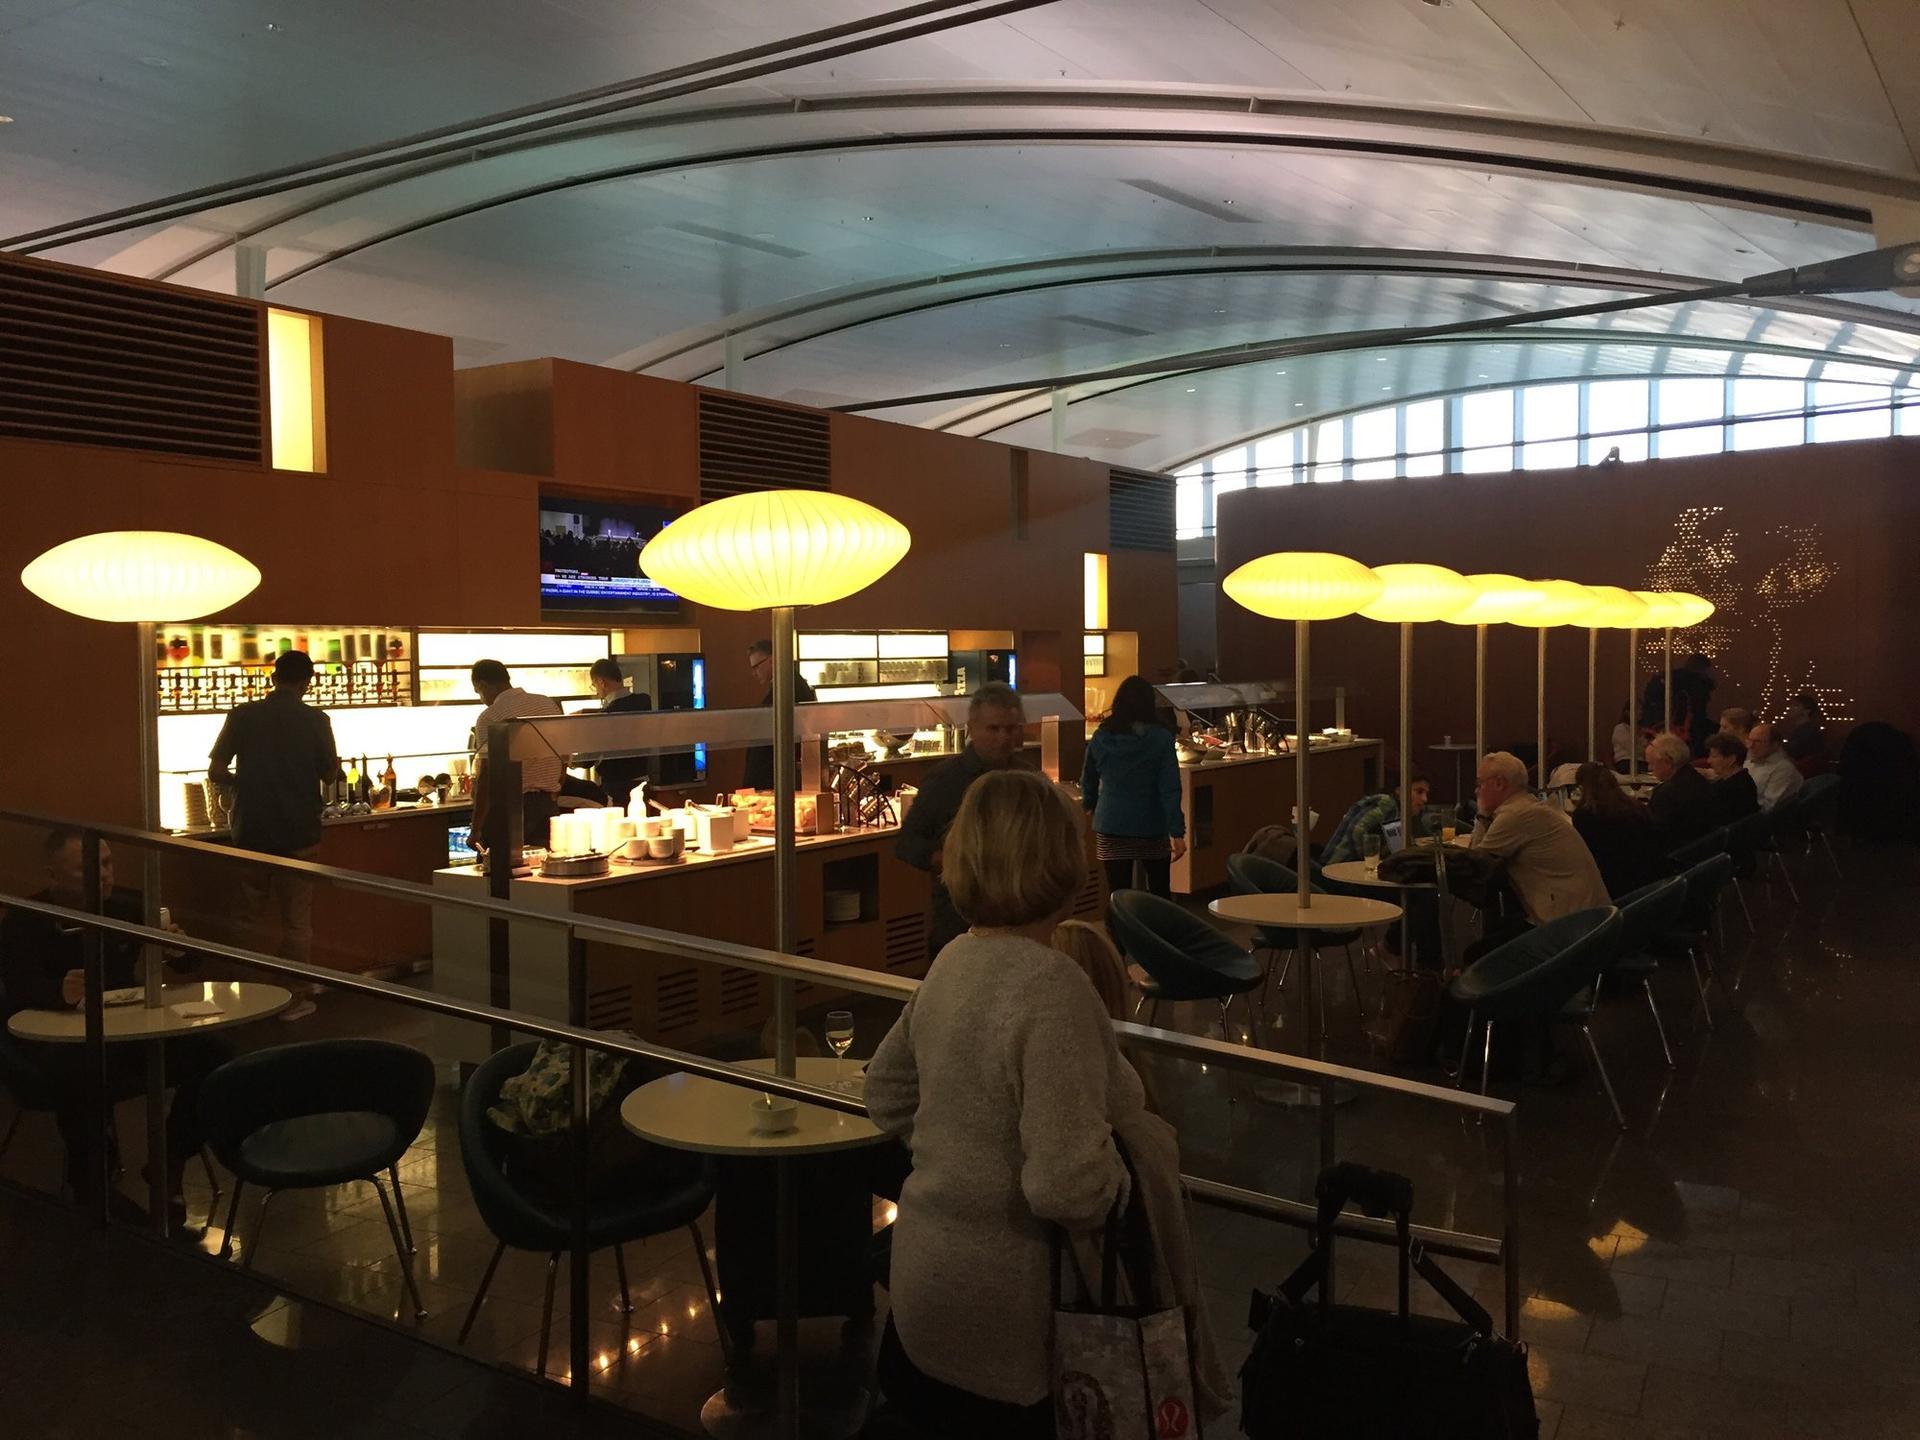 Air Canada Maple Leaf Lounge image 21 of 27